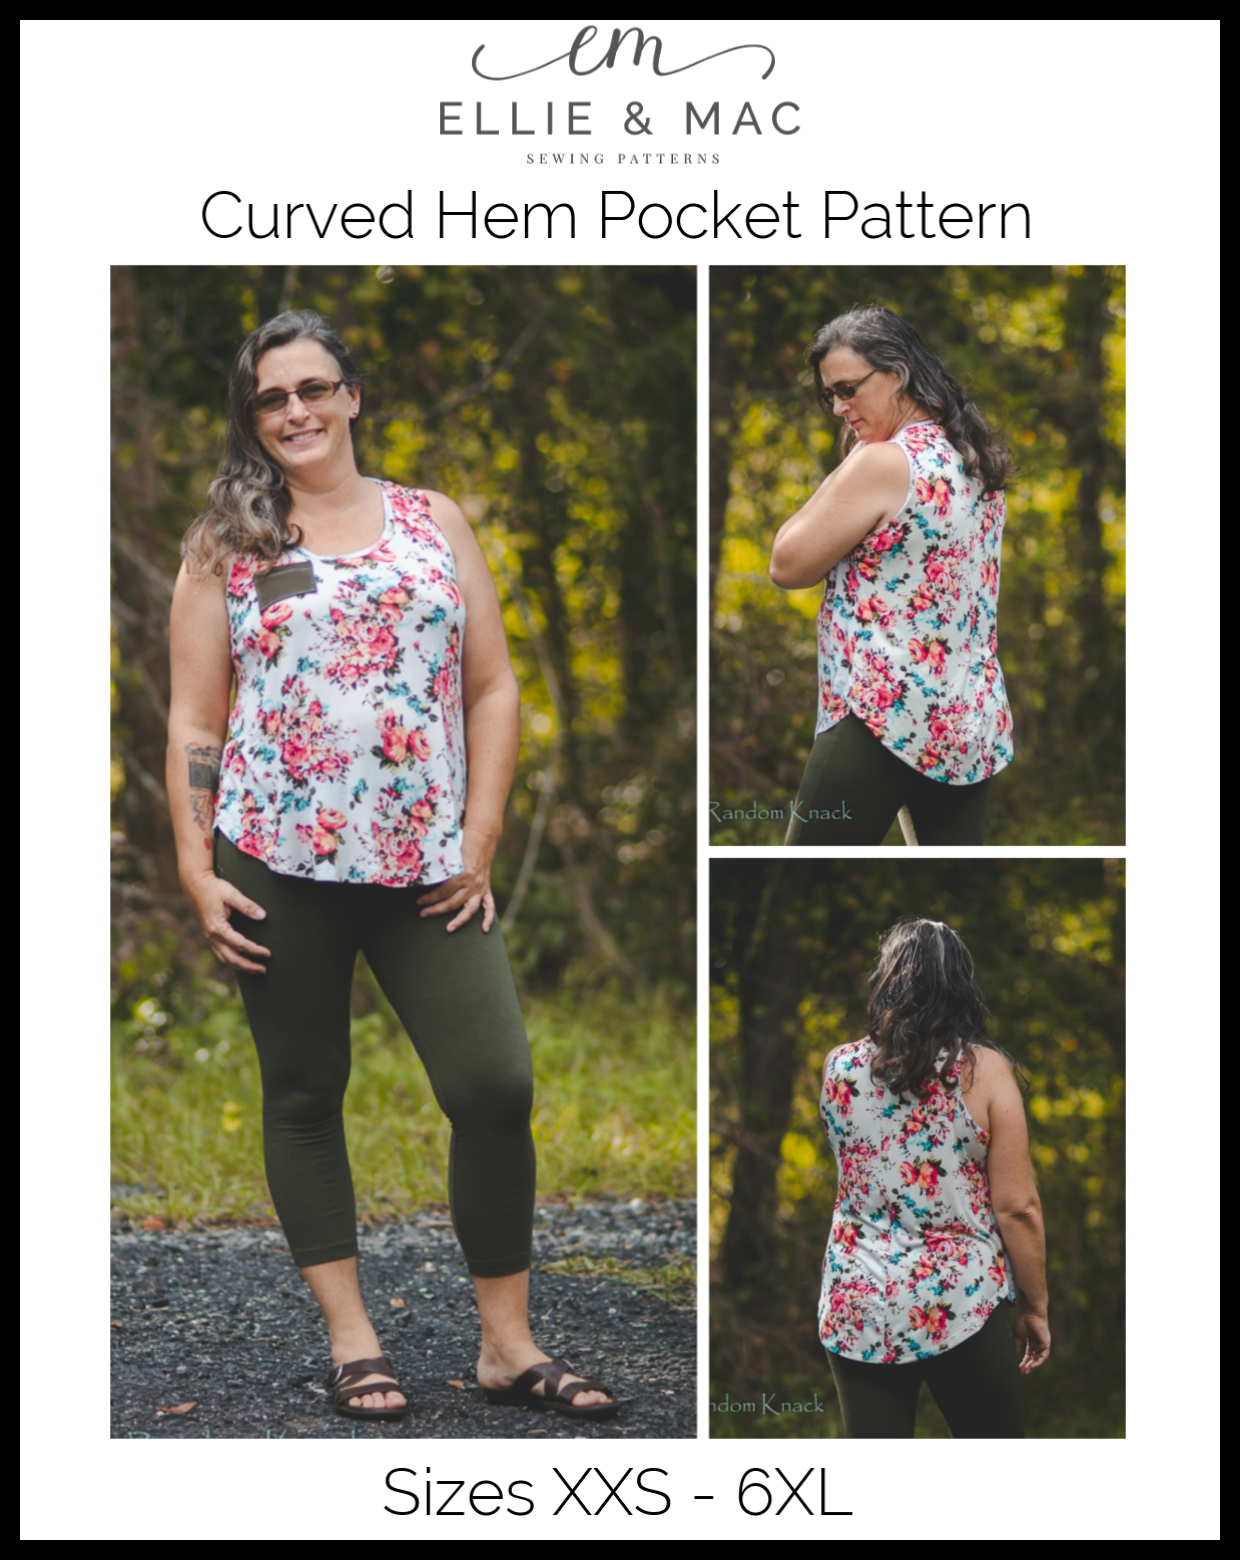 How to Sew Curved Pockets that are Beautiful and Match 